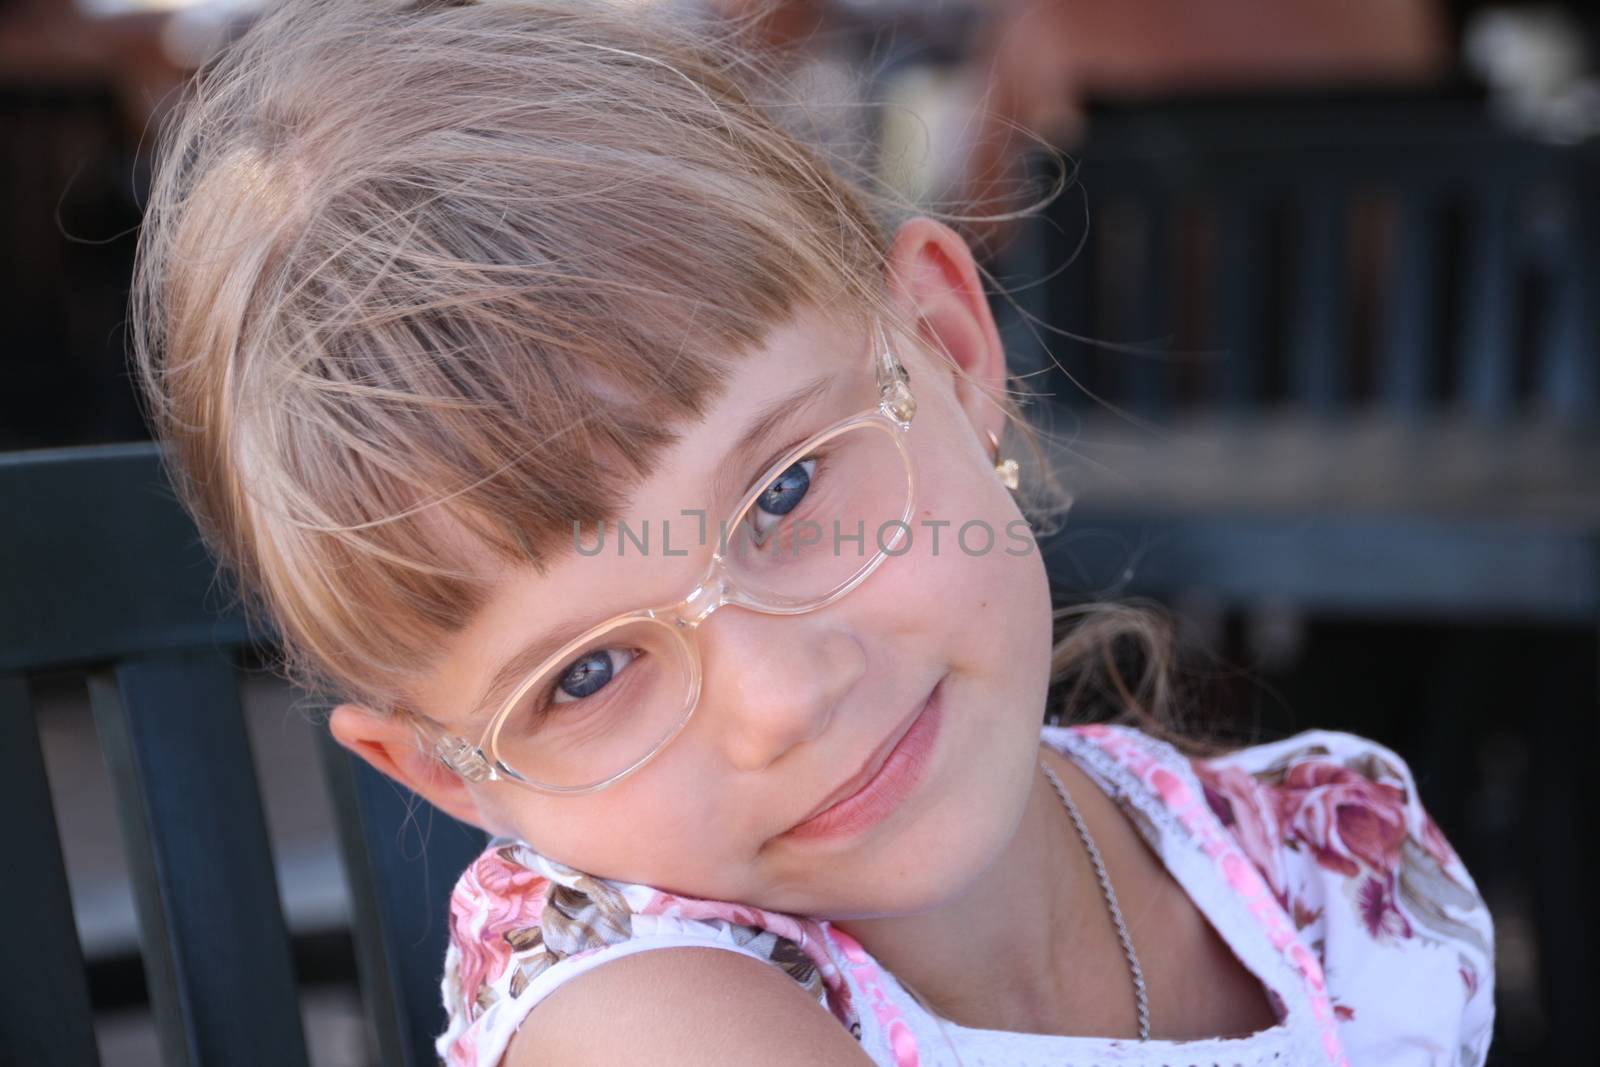 Smiling little blond girl with glasses bent her head